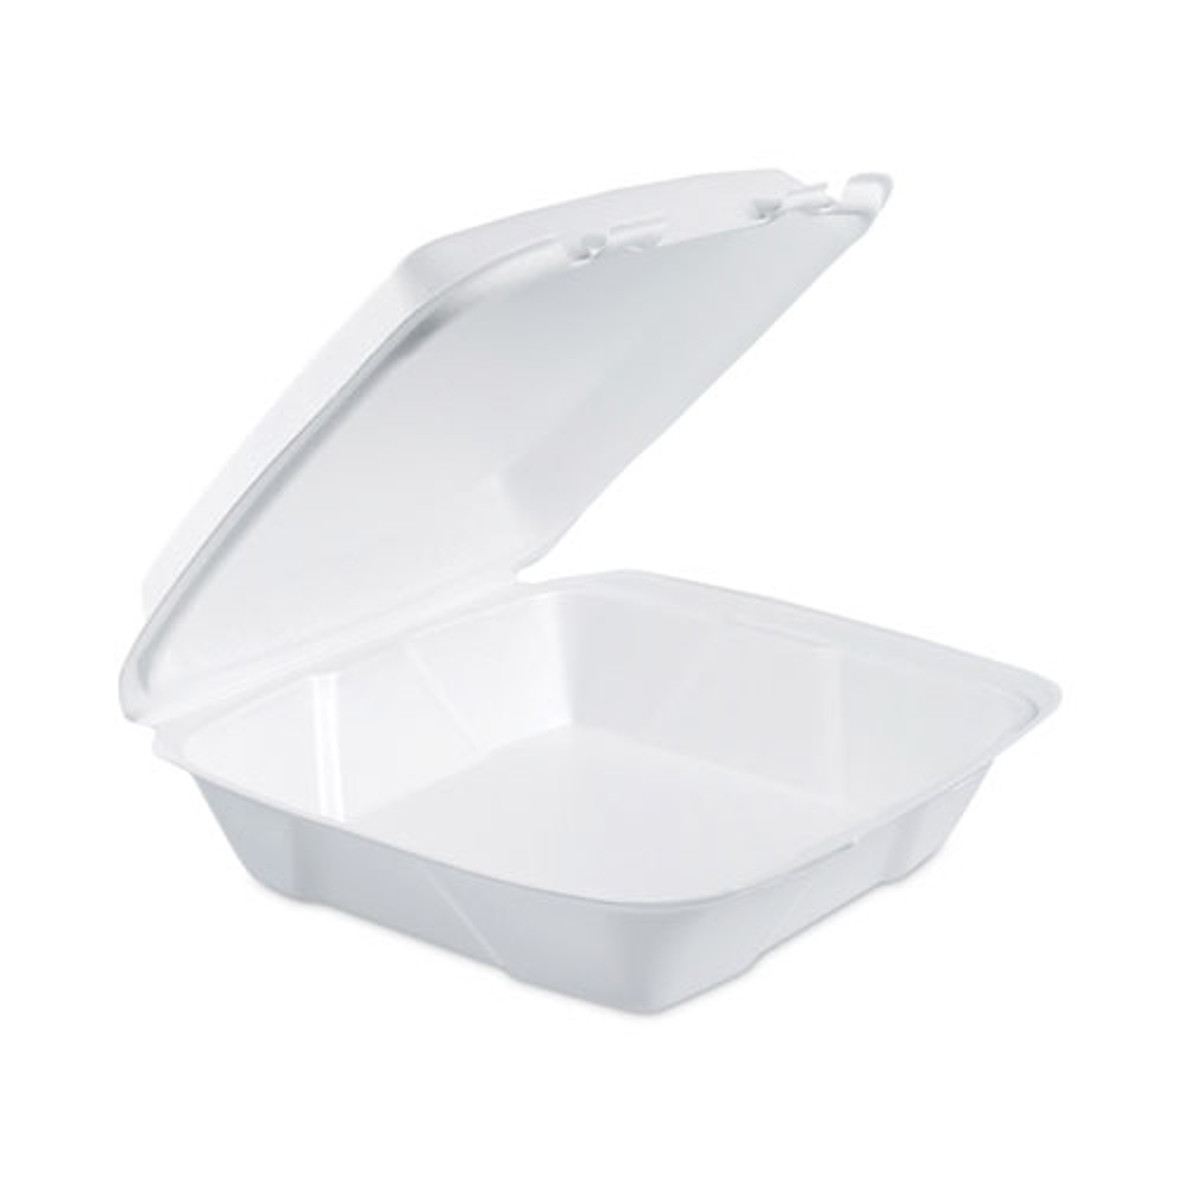 Boardwalk 9 in. x 6 in. x 3.19 in. White Bagasse Food Containers